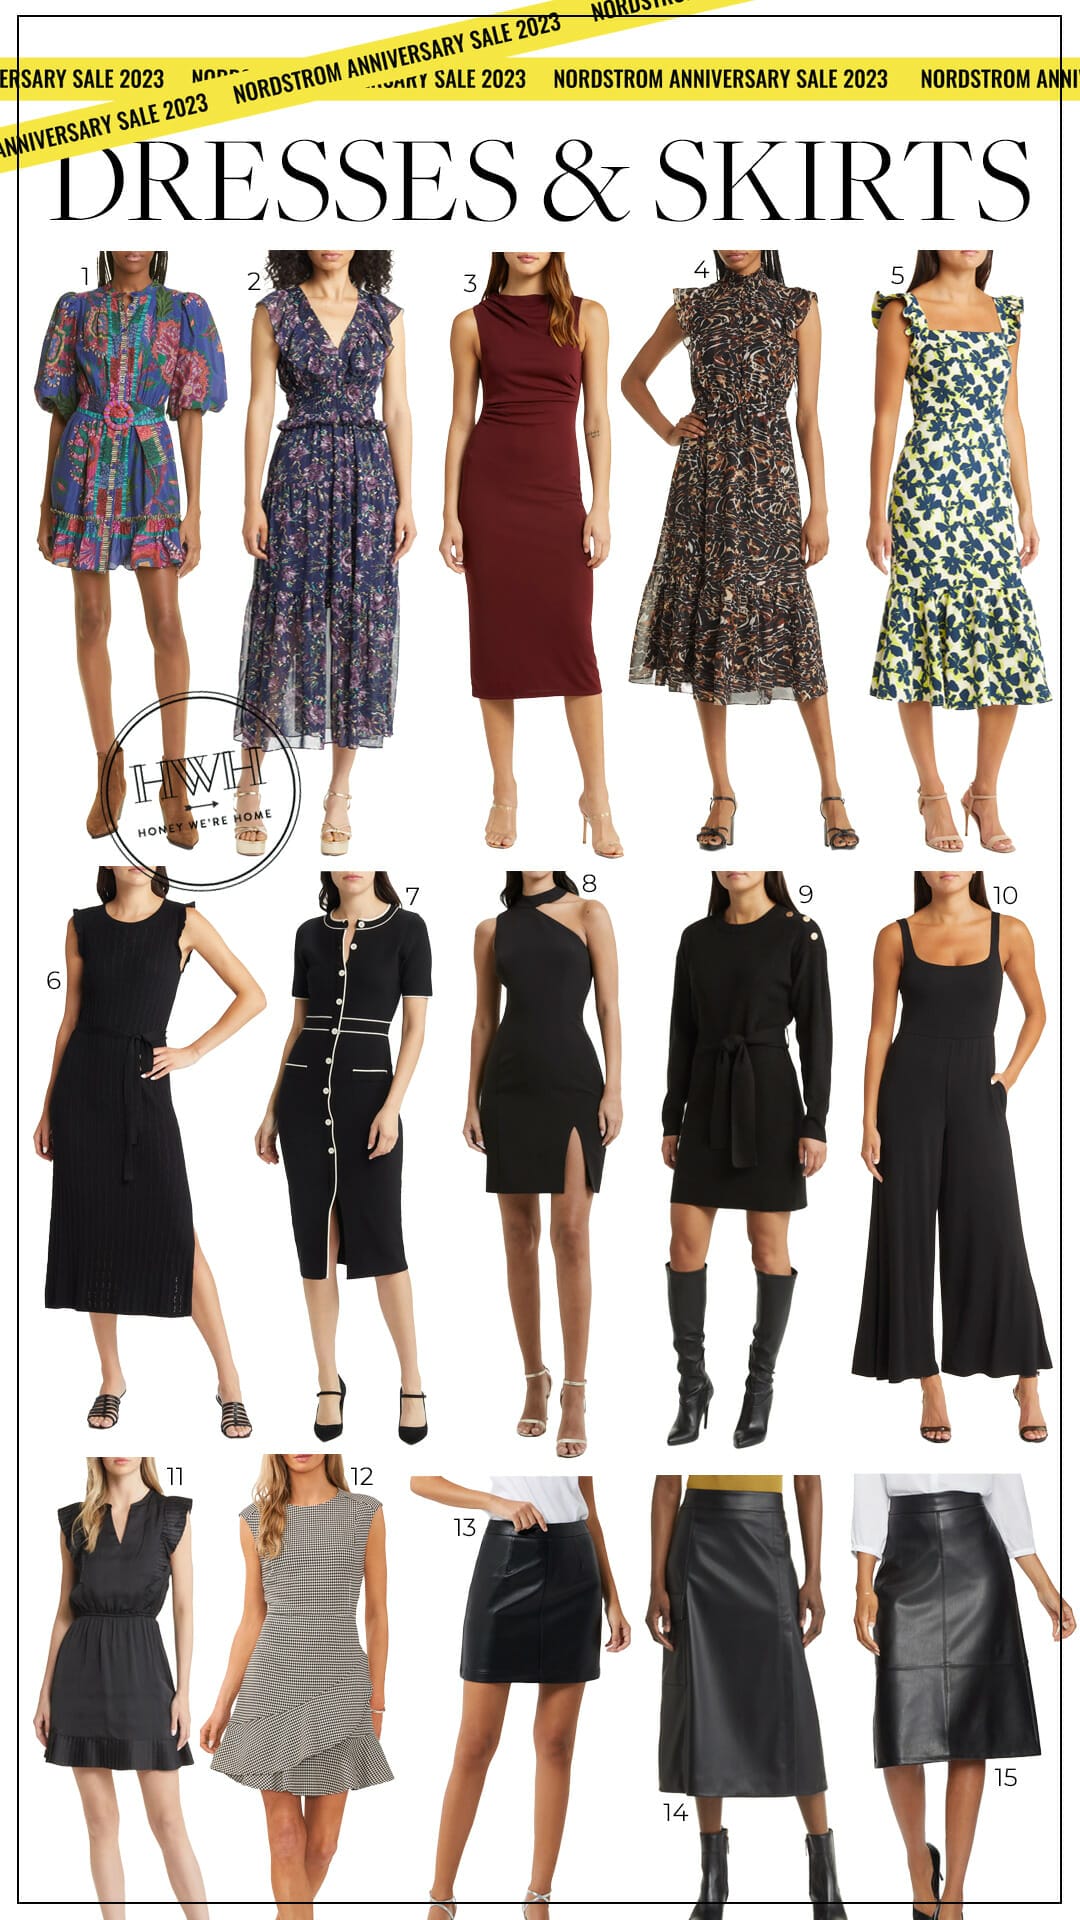 BEST OF NORDSTROM ANNIVERSARY SALE 2023 | skirts and dresses